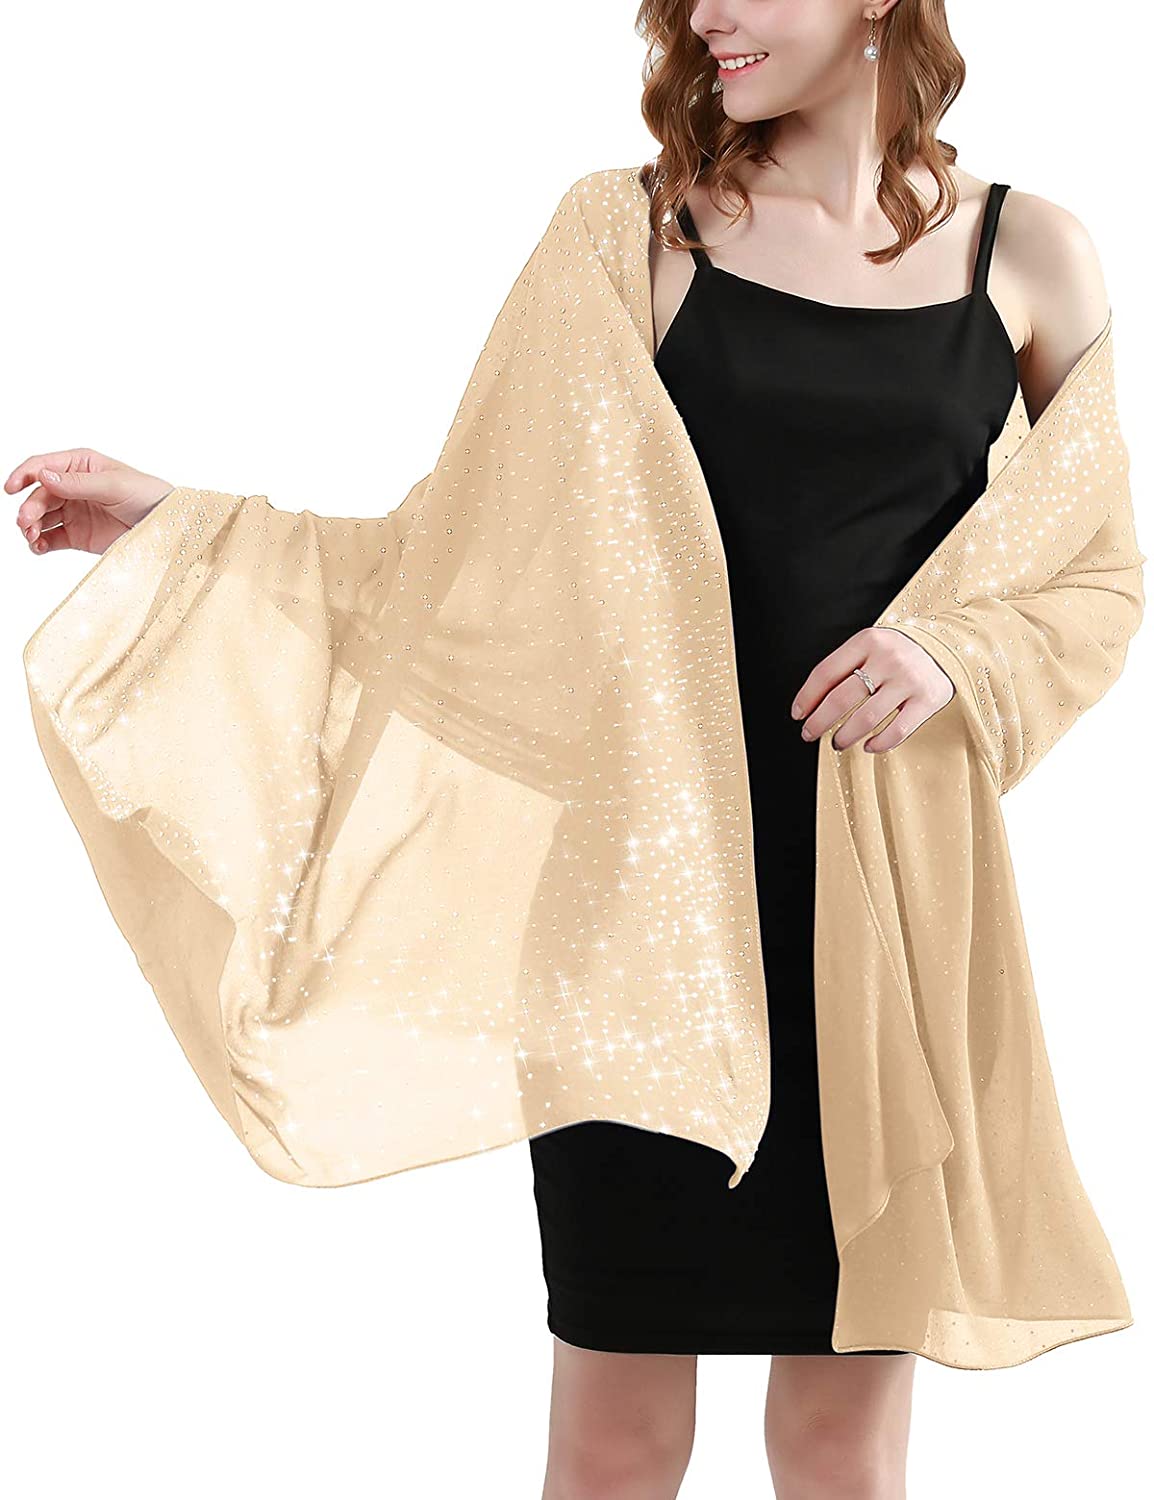 Banetteta Soft Chiffion Sparkly Rhinestone Shawls and Wraps for Evening ...